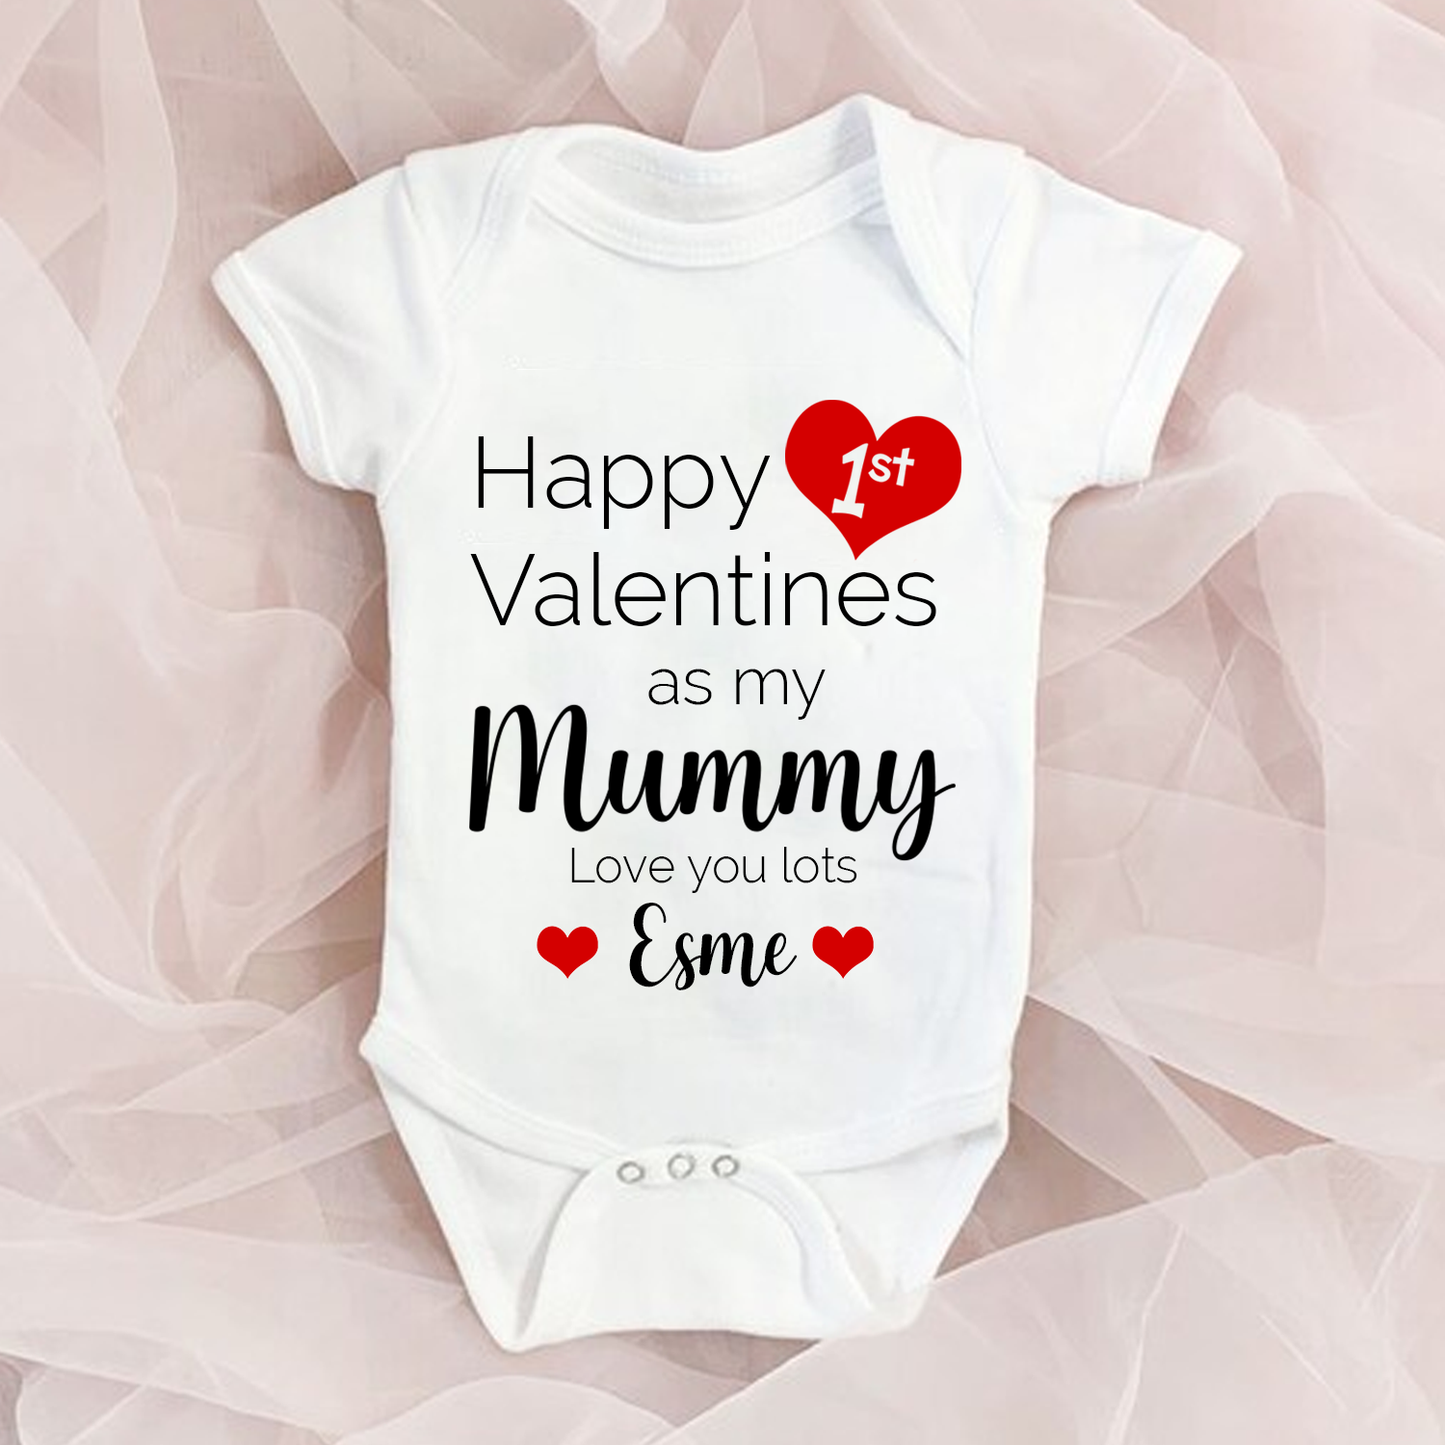 Happy 1st Valentine's Day as my Mummy- Personalised Baby Vest